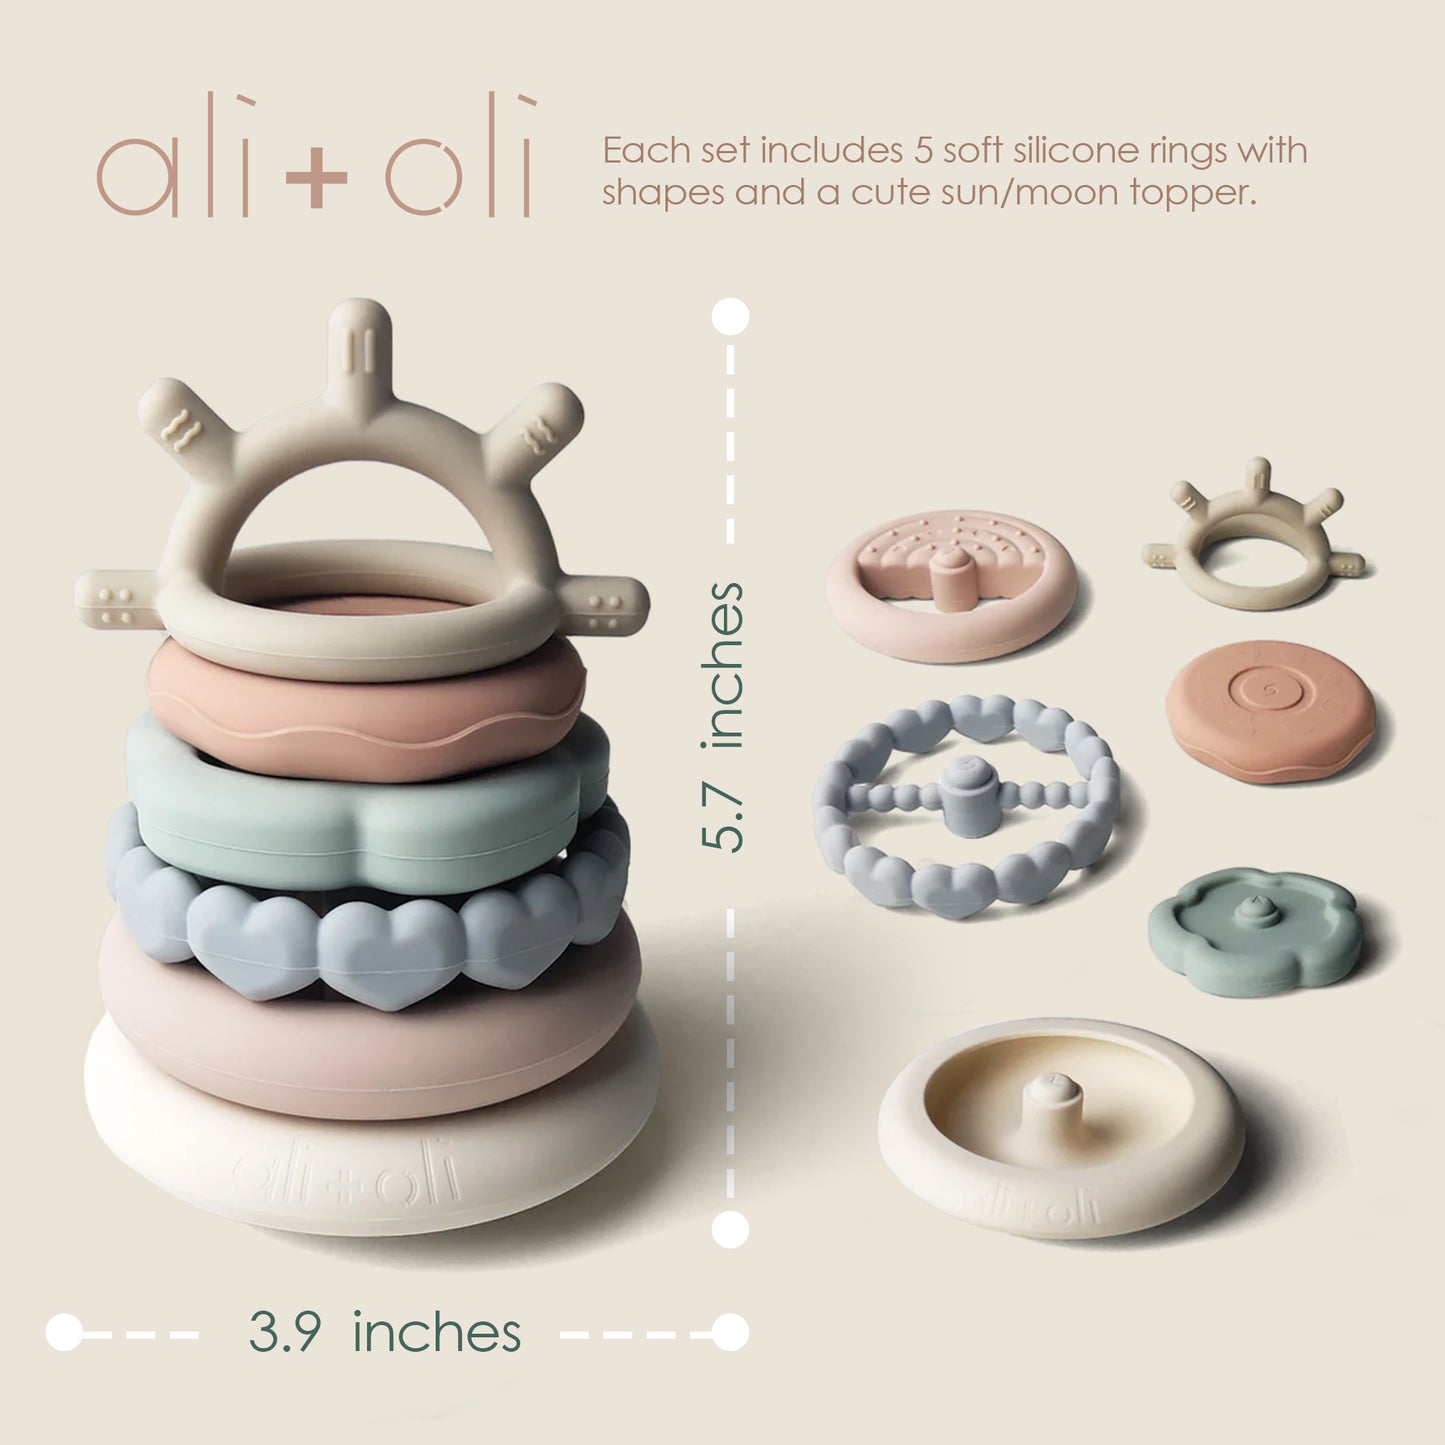 Soft Silicone Stacking Ring Tower in Sun